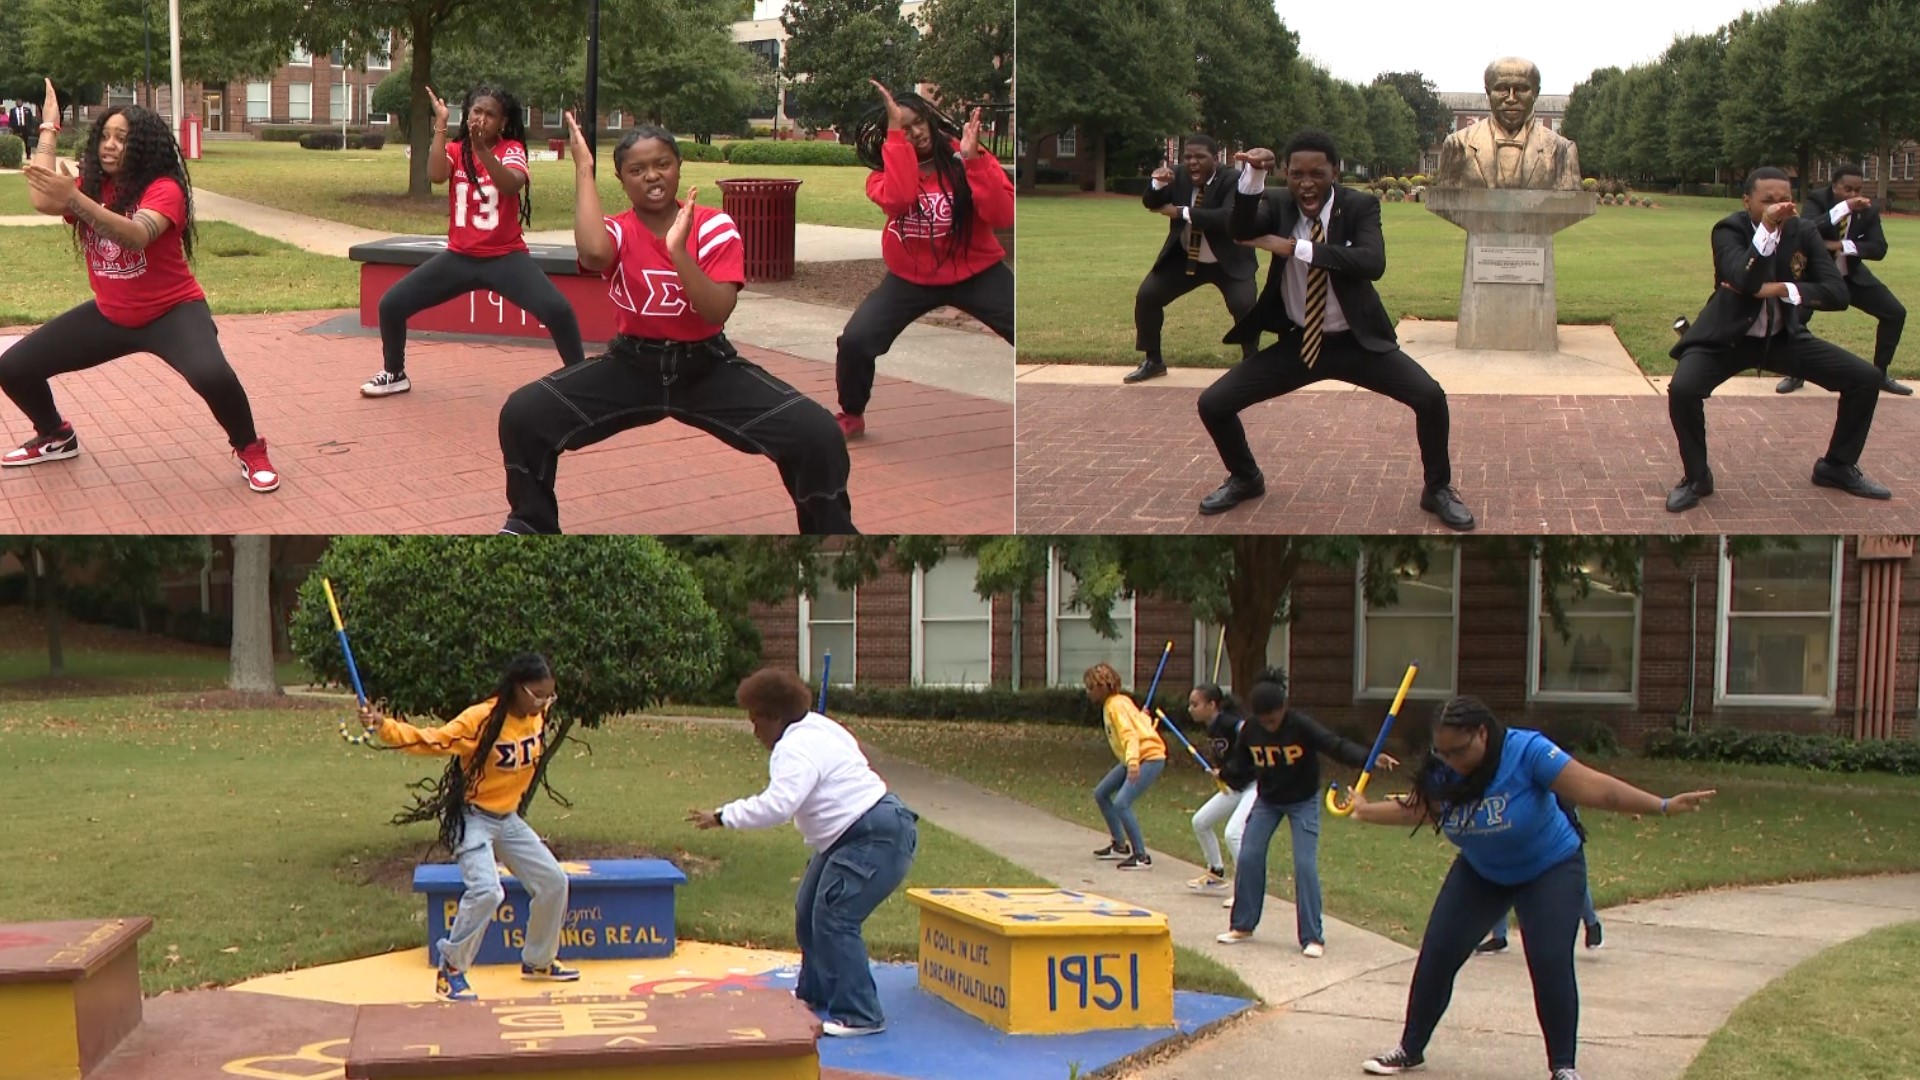 Fraternities and sororities will be showing out and celebrating the stepping tradition